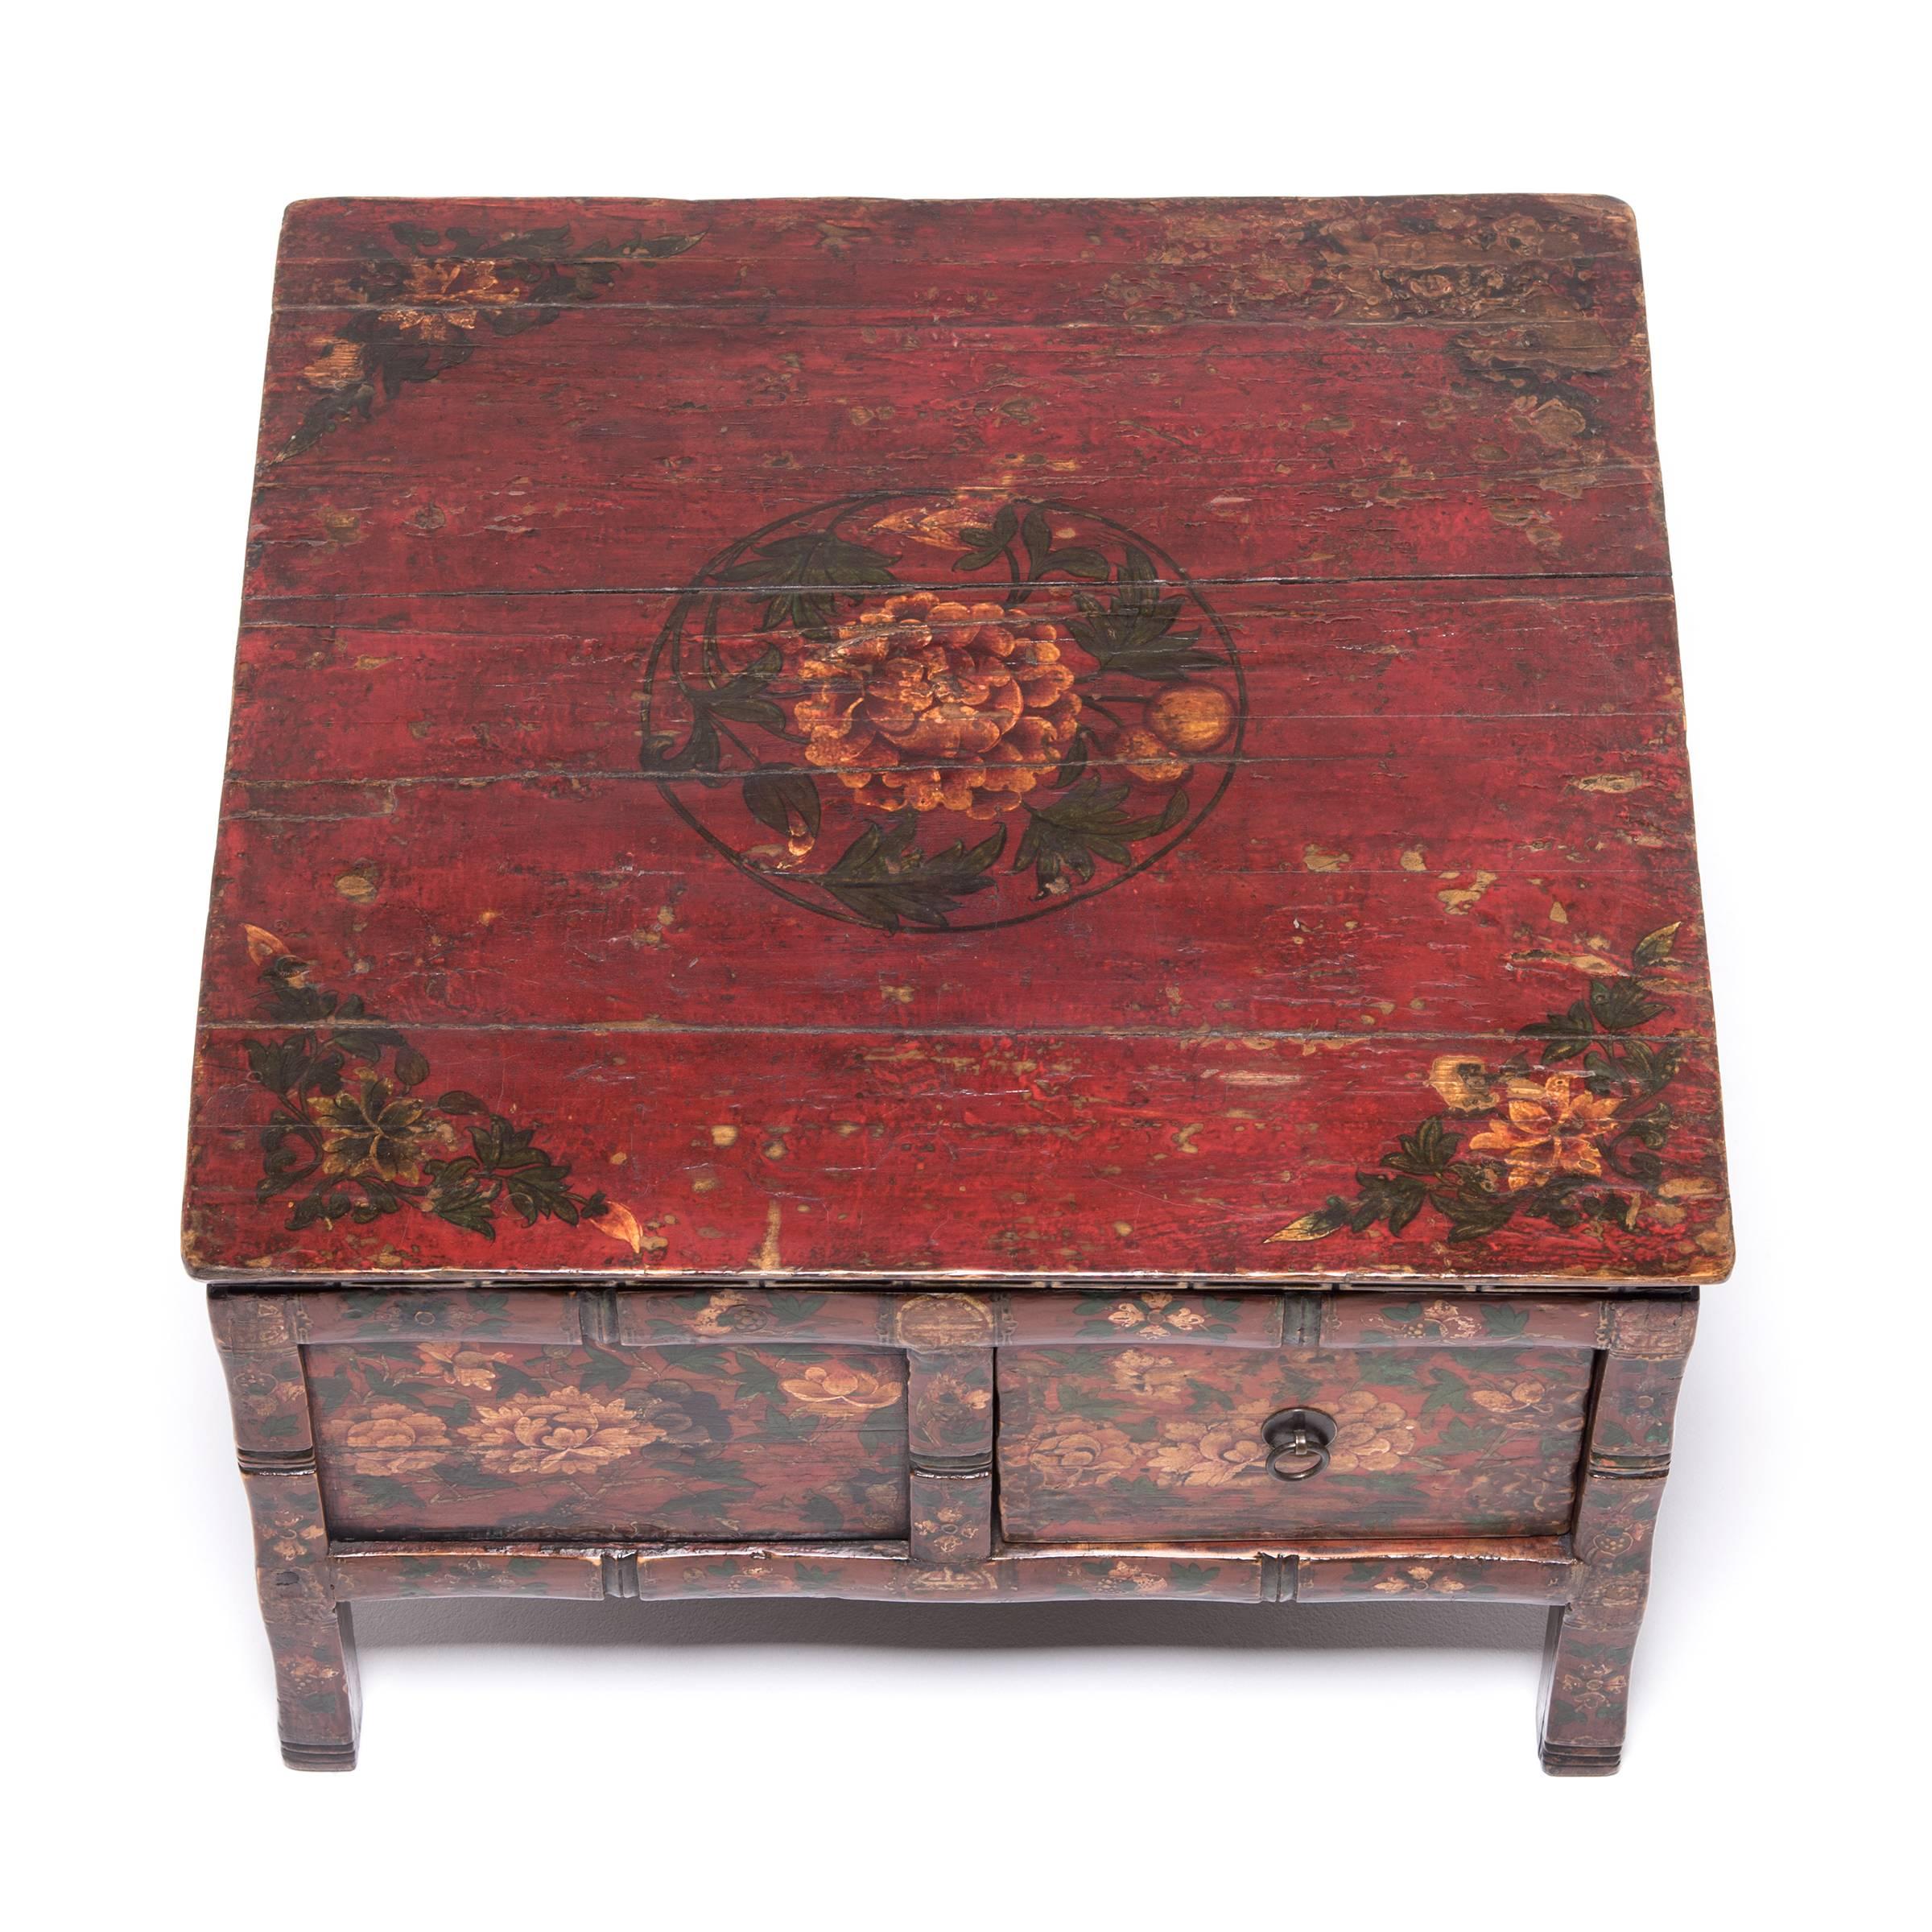 19th Century Low Tibetan Peony Table with Four Drawers, c. 1850